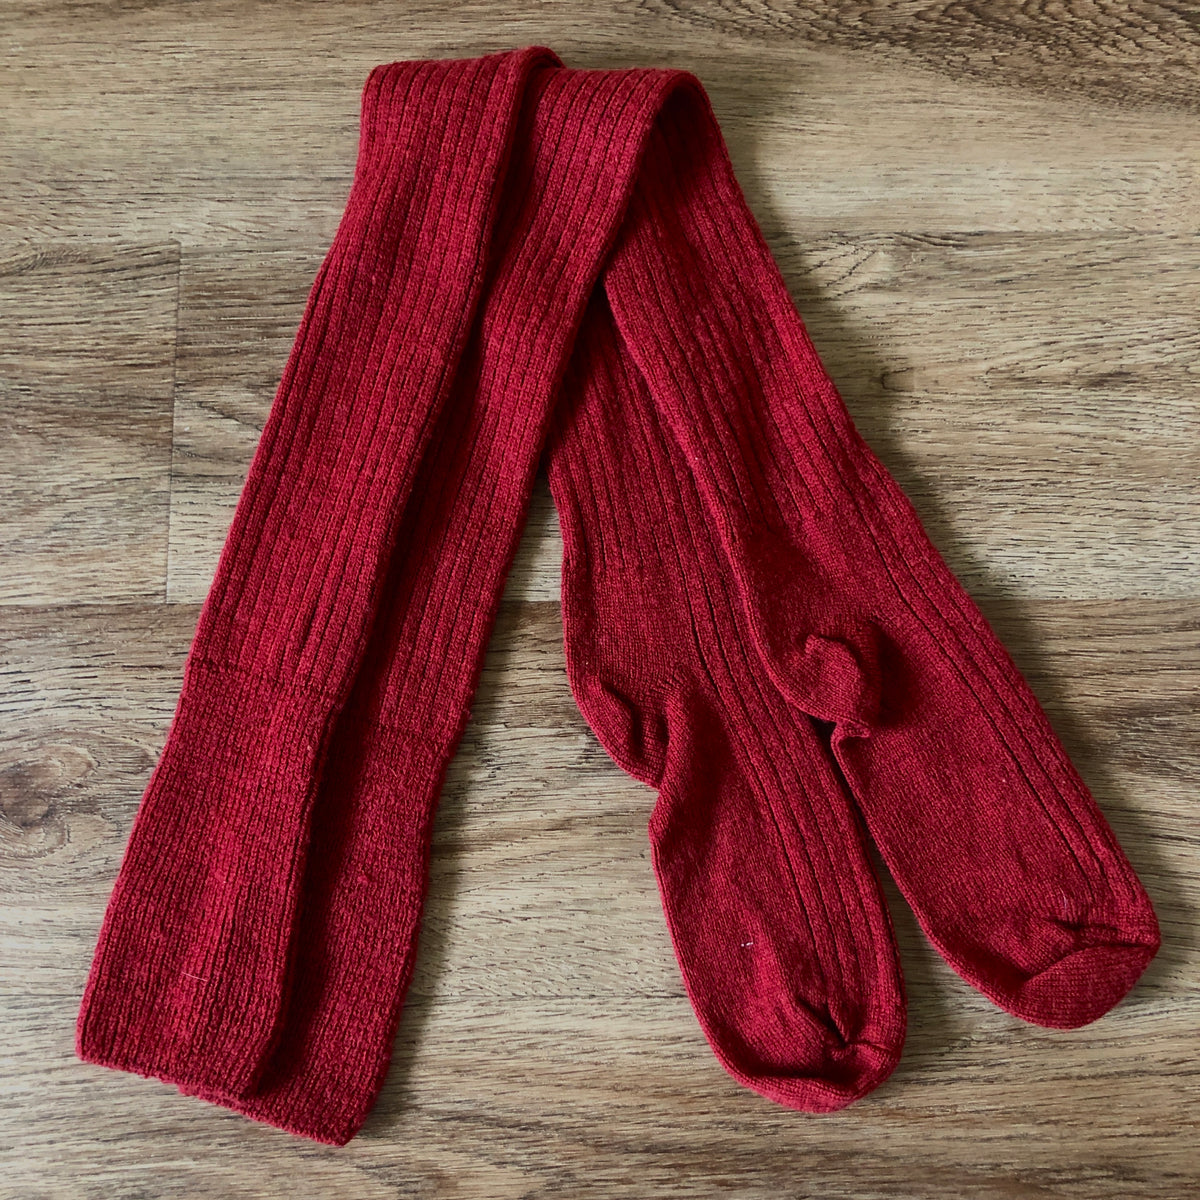 Lightweight Wool Stockings – Willoughby & Rose